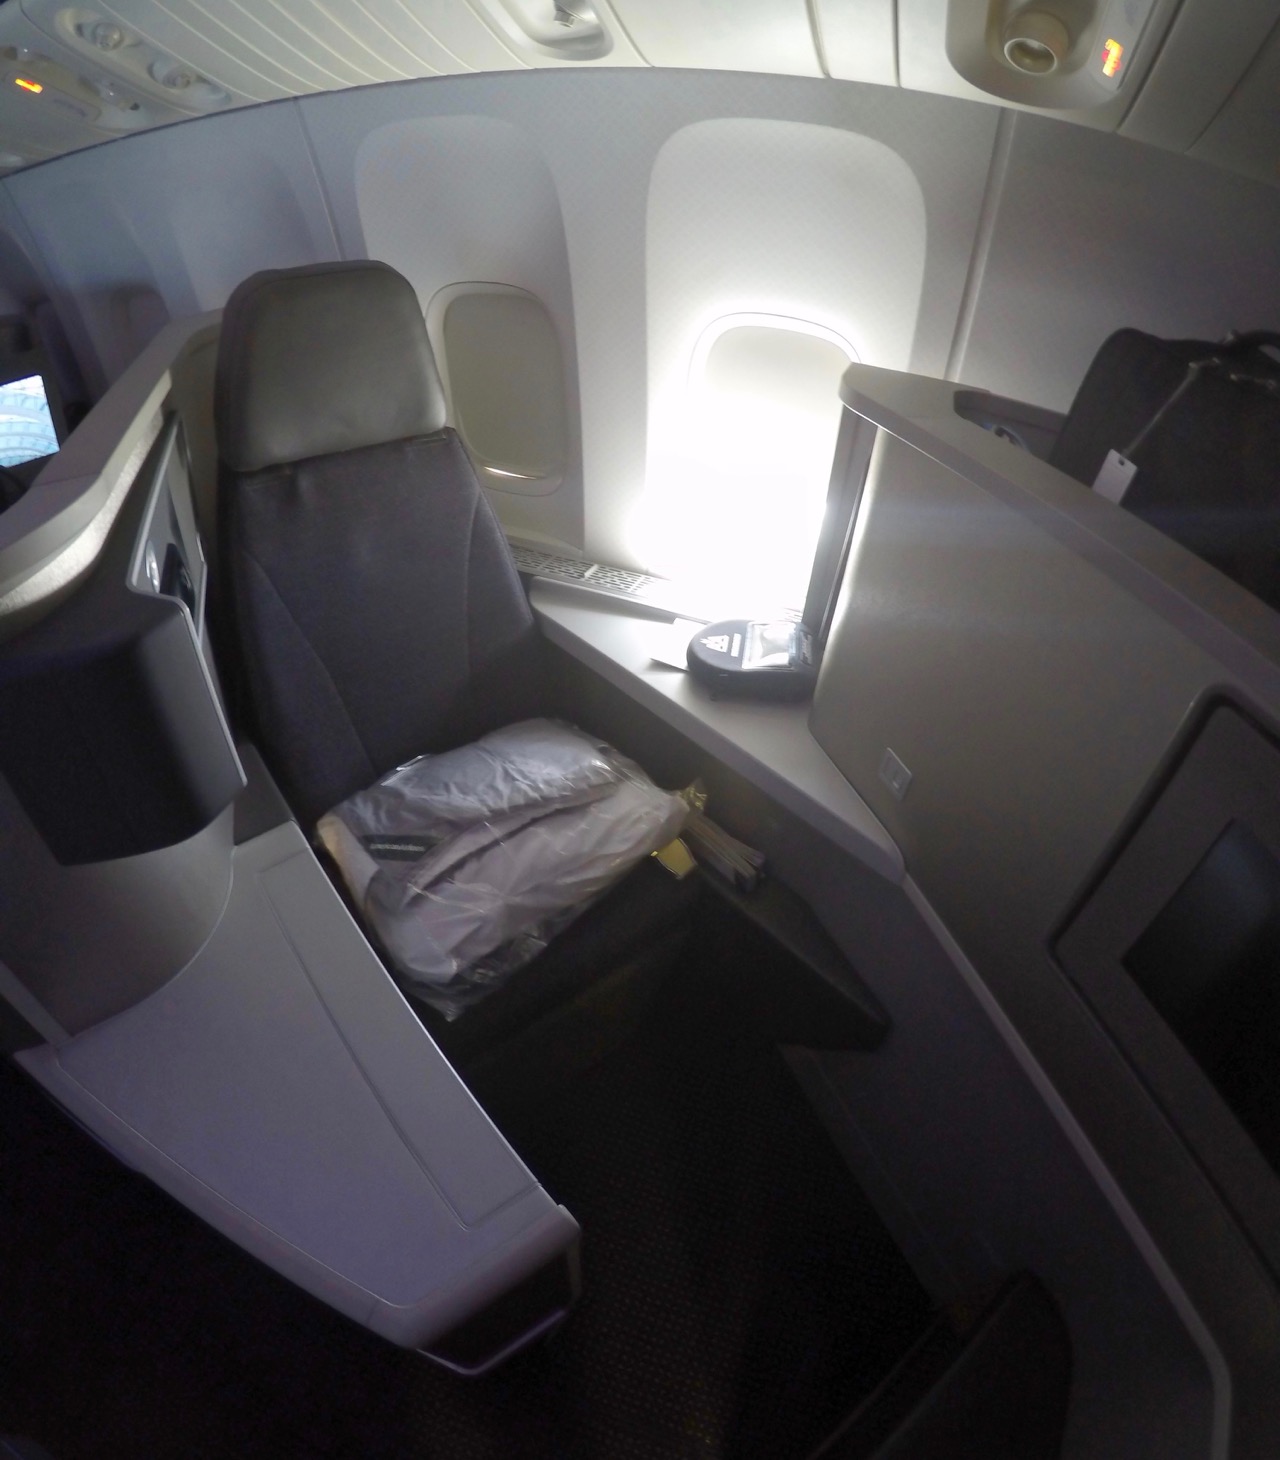 American Airlines 777-200 Business Class seats | Point Hacks